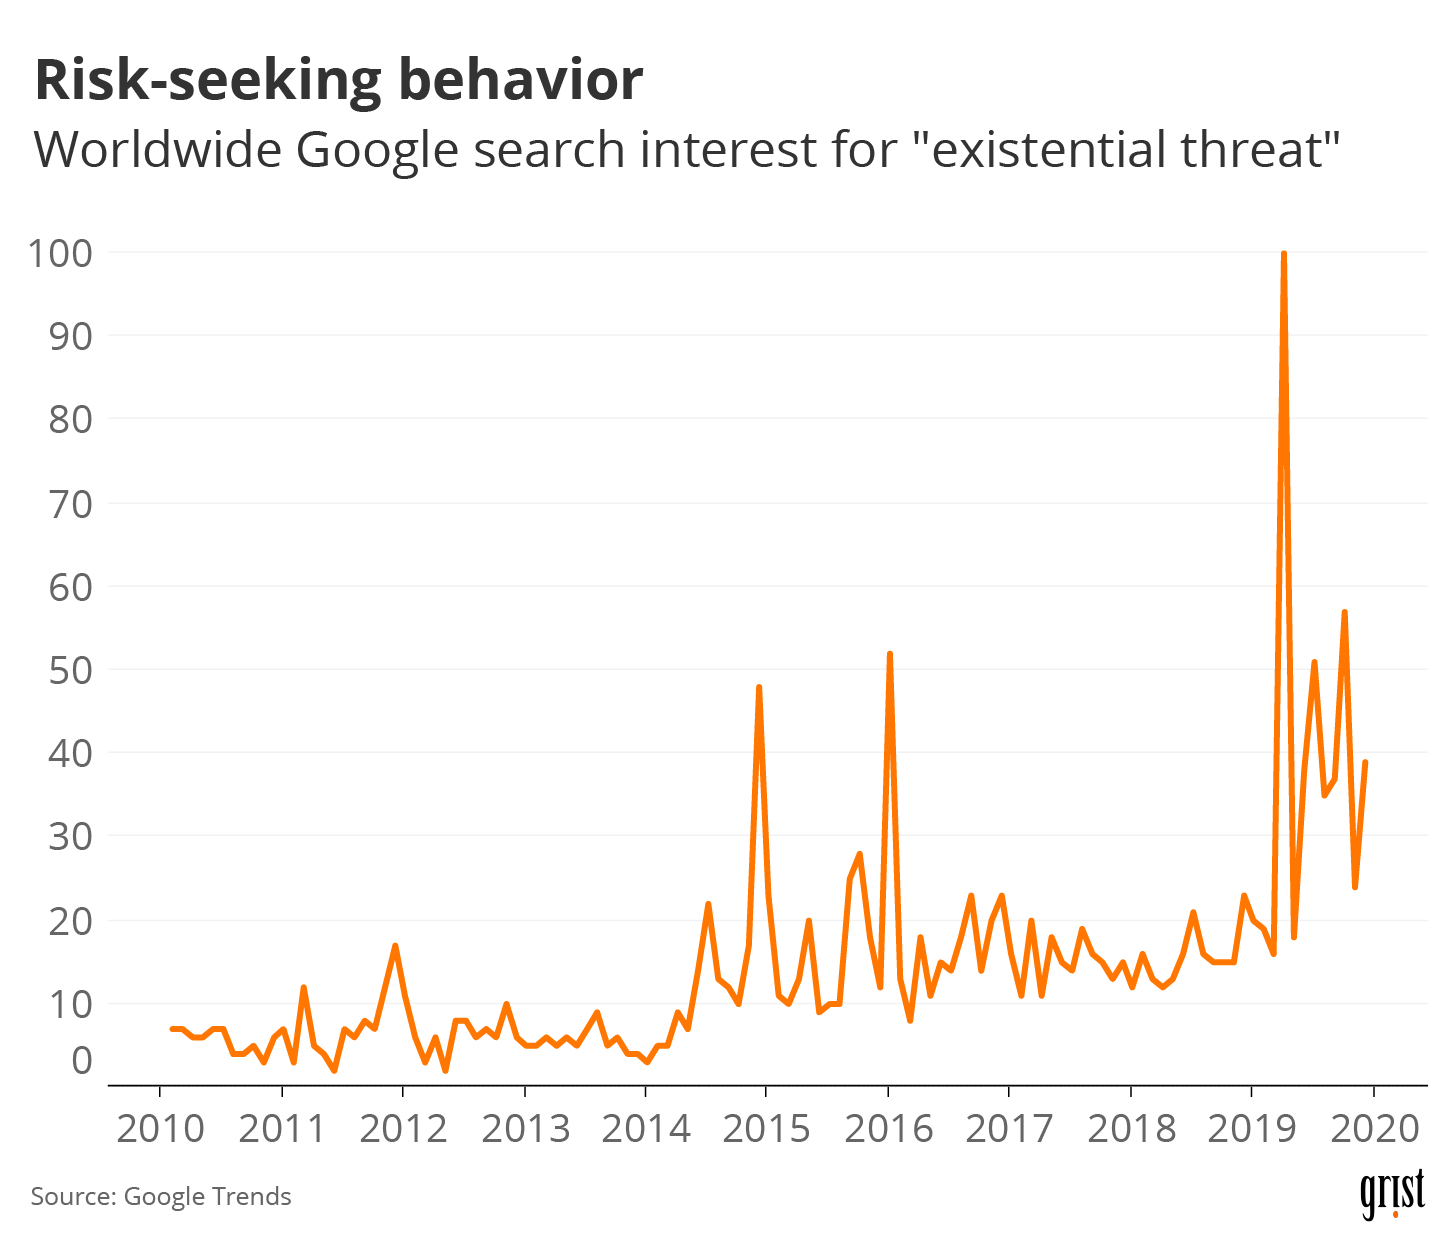 A line chart showing Google search interest for "existential threat" between 2010 and 2020. Search interest rises over time.